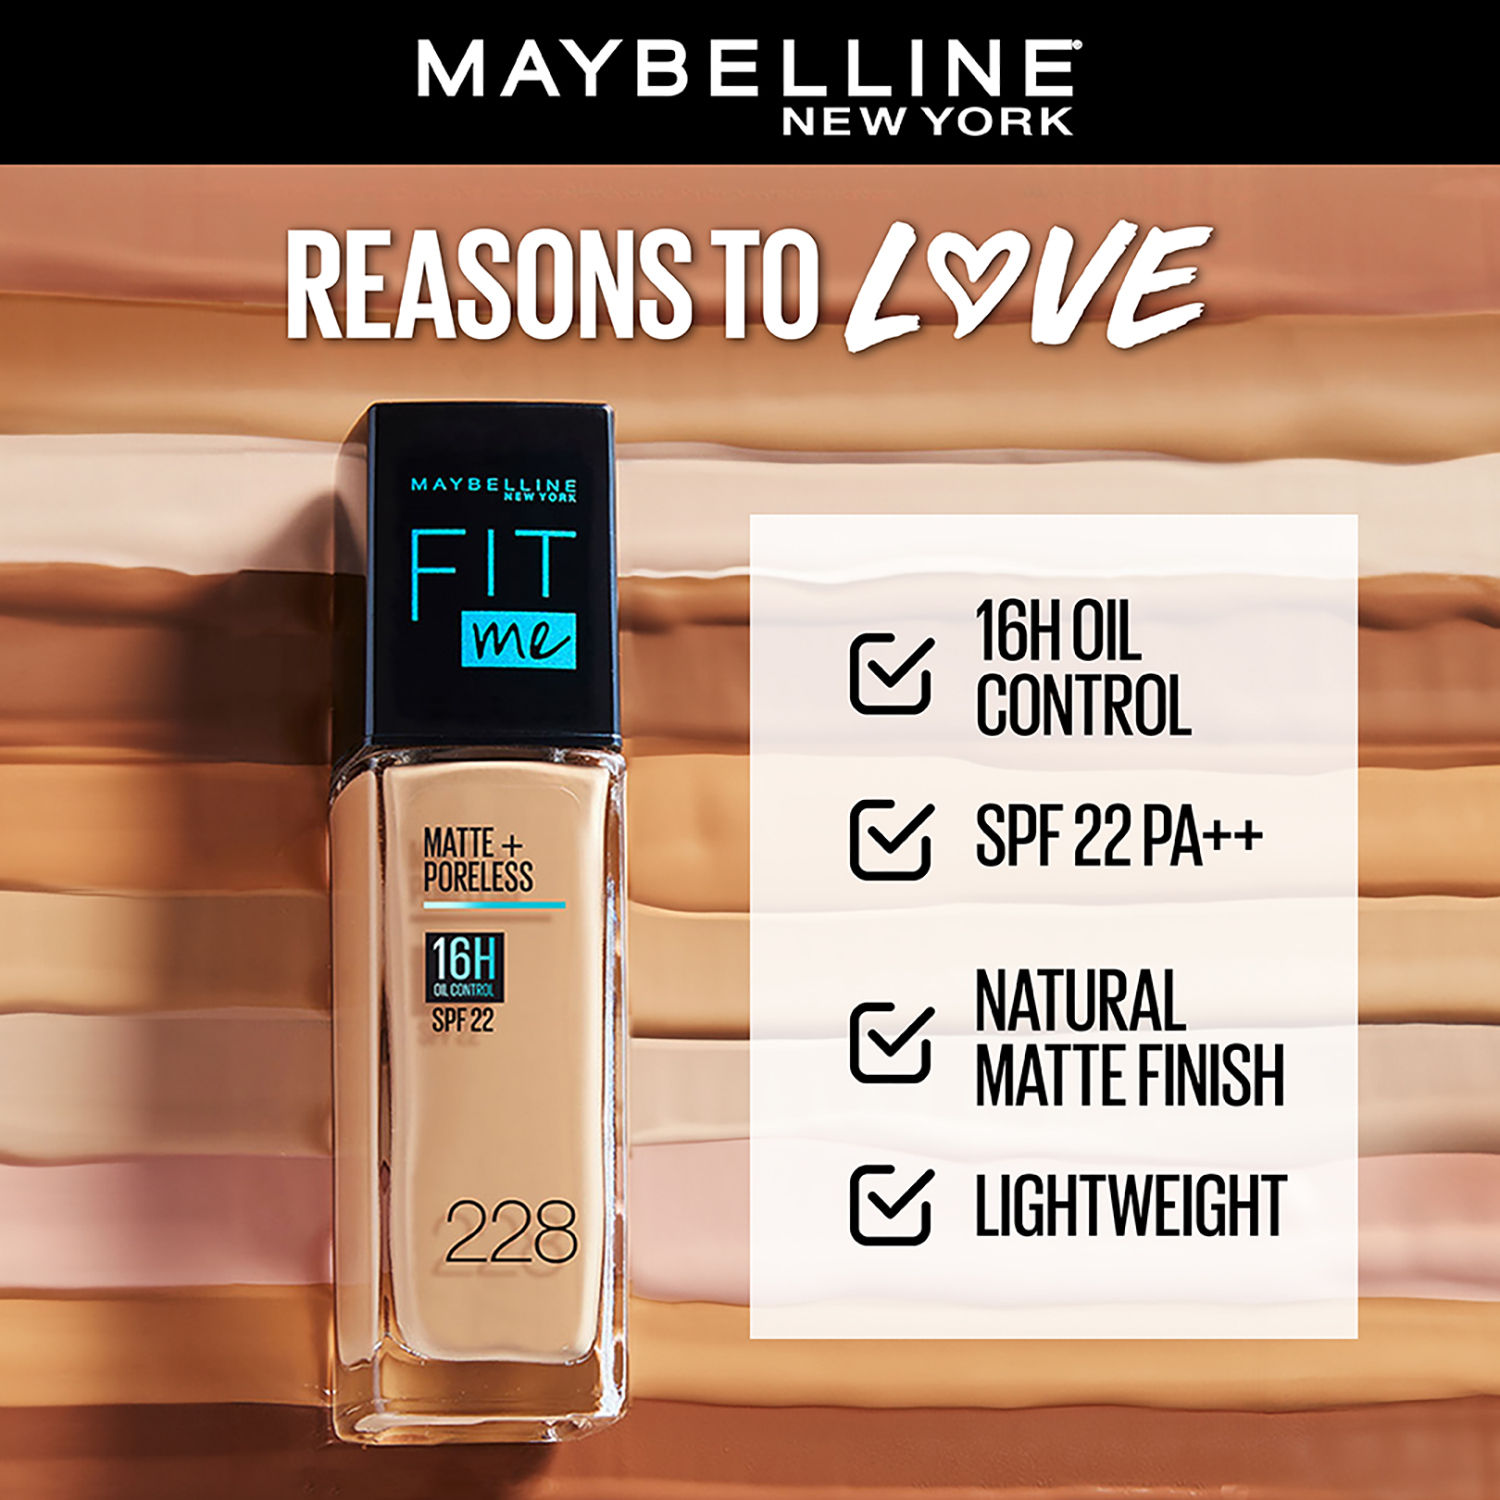 Buy MAYBELLINE 115 The Archies Limited Edition Fit Me Matte + Poreless  Liquid Foundation